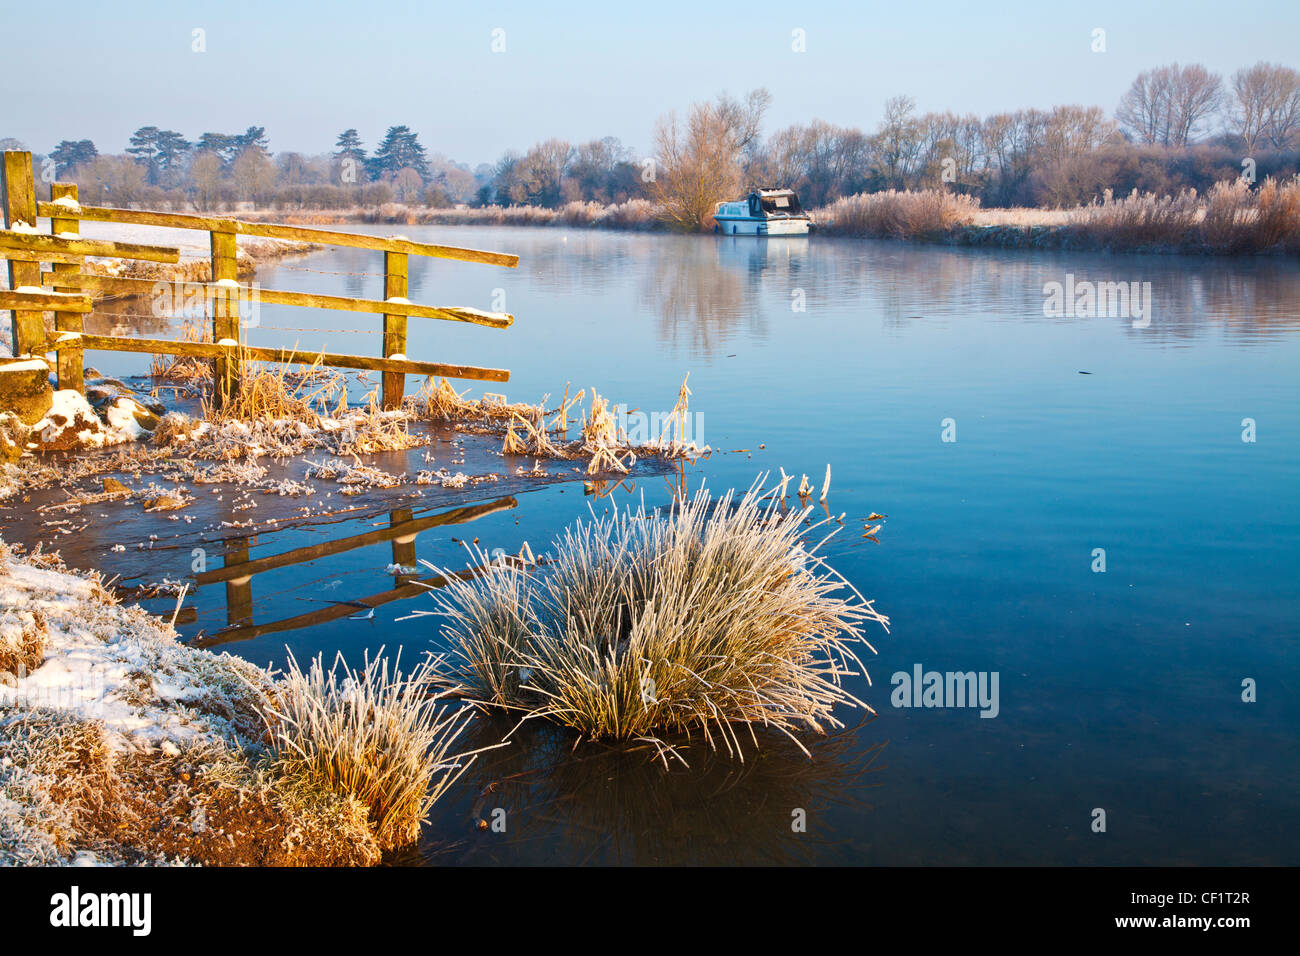 A frosty Cotswold winter morning on the River Thames at Lechlade, Gloucestershire, England, UK Stock Photo